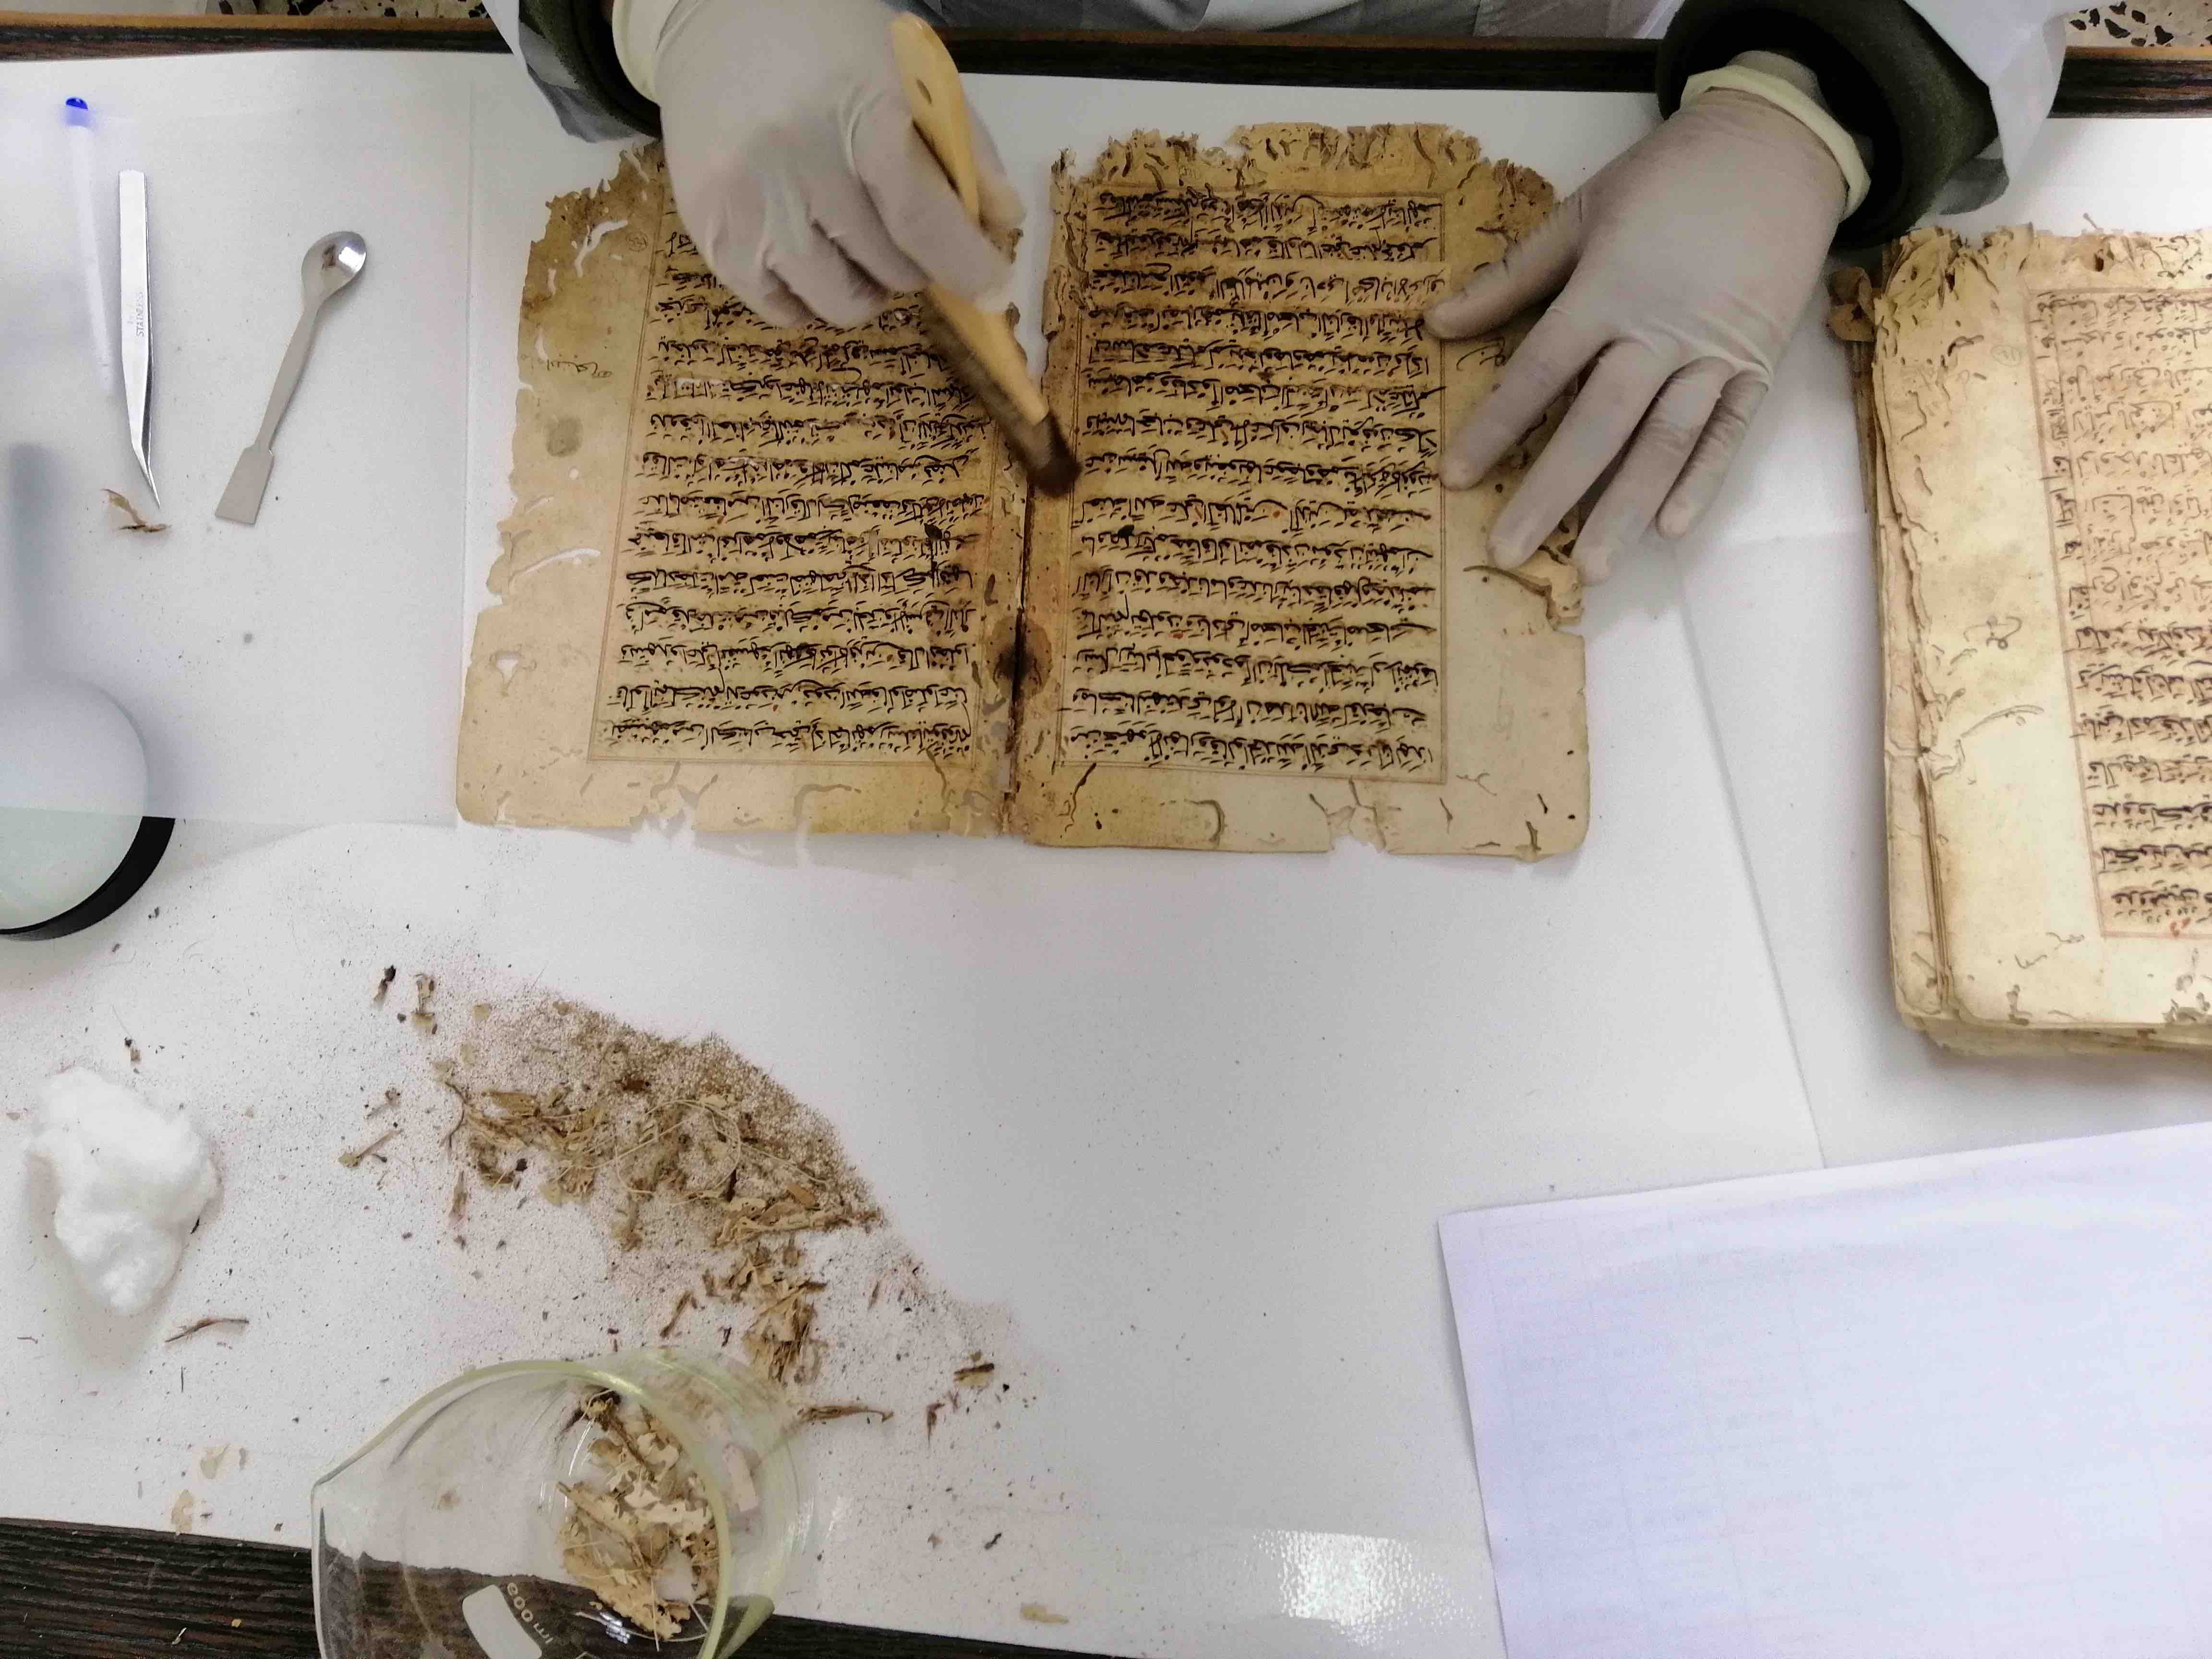 Technician cleaning a manuscript in preparation for digitization